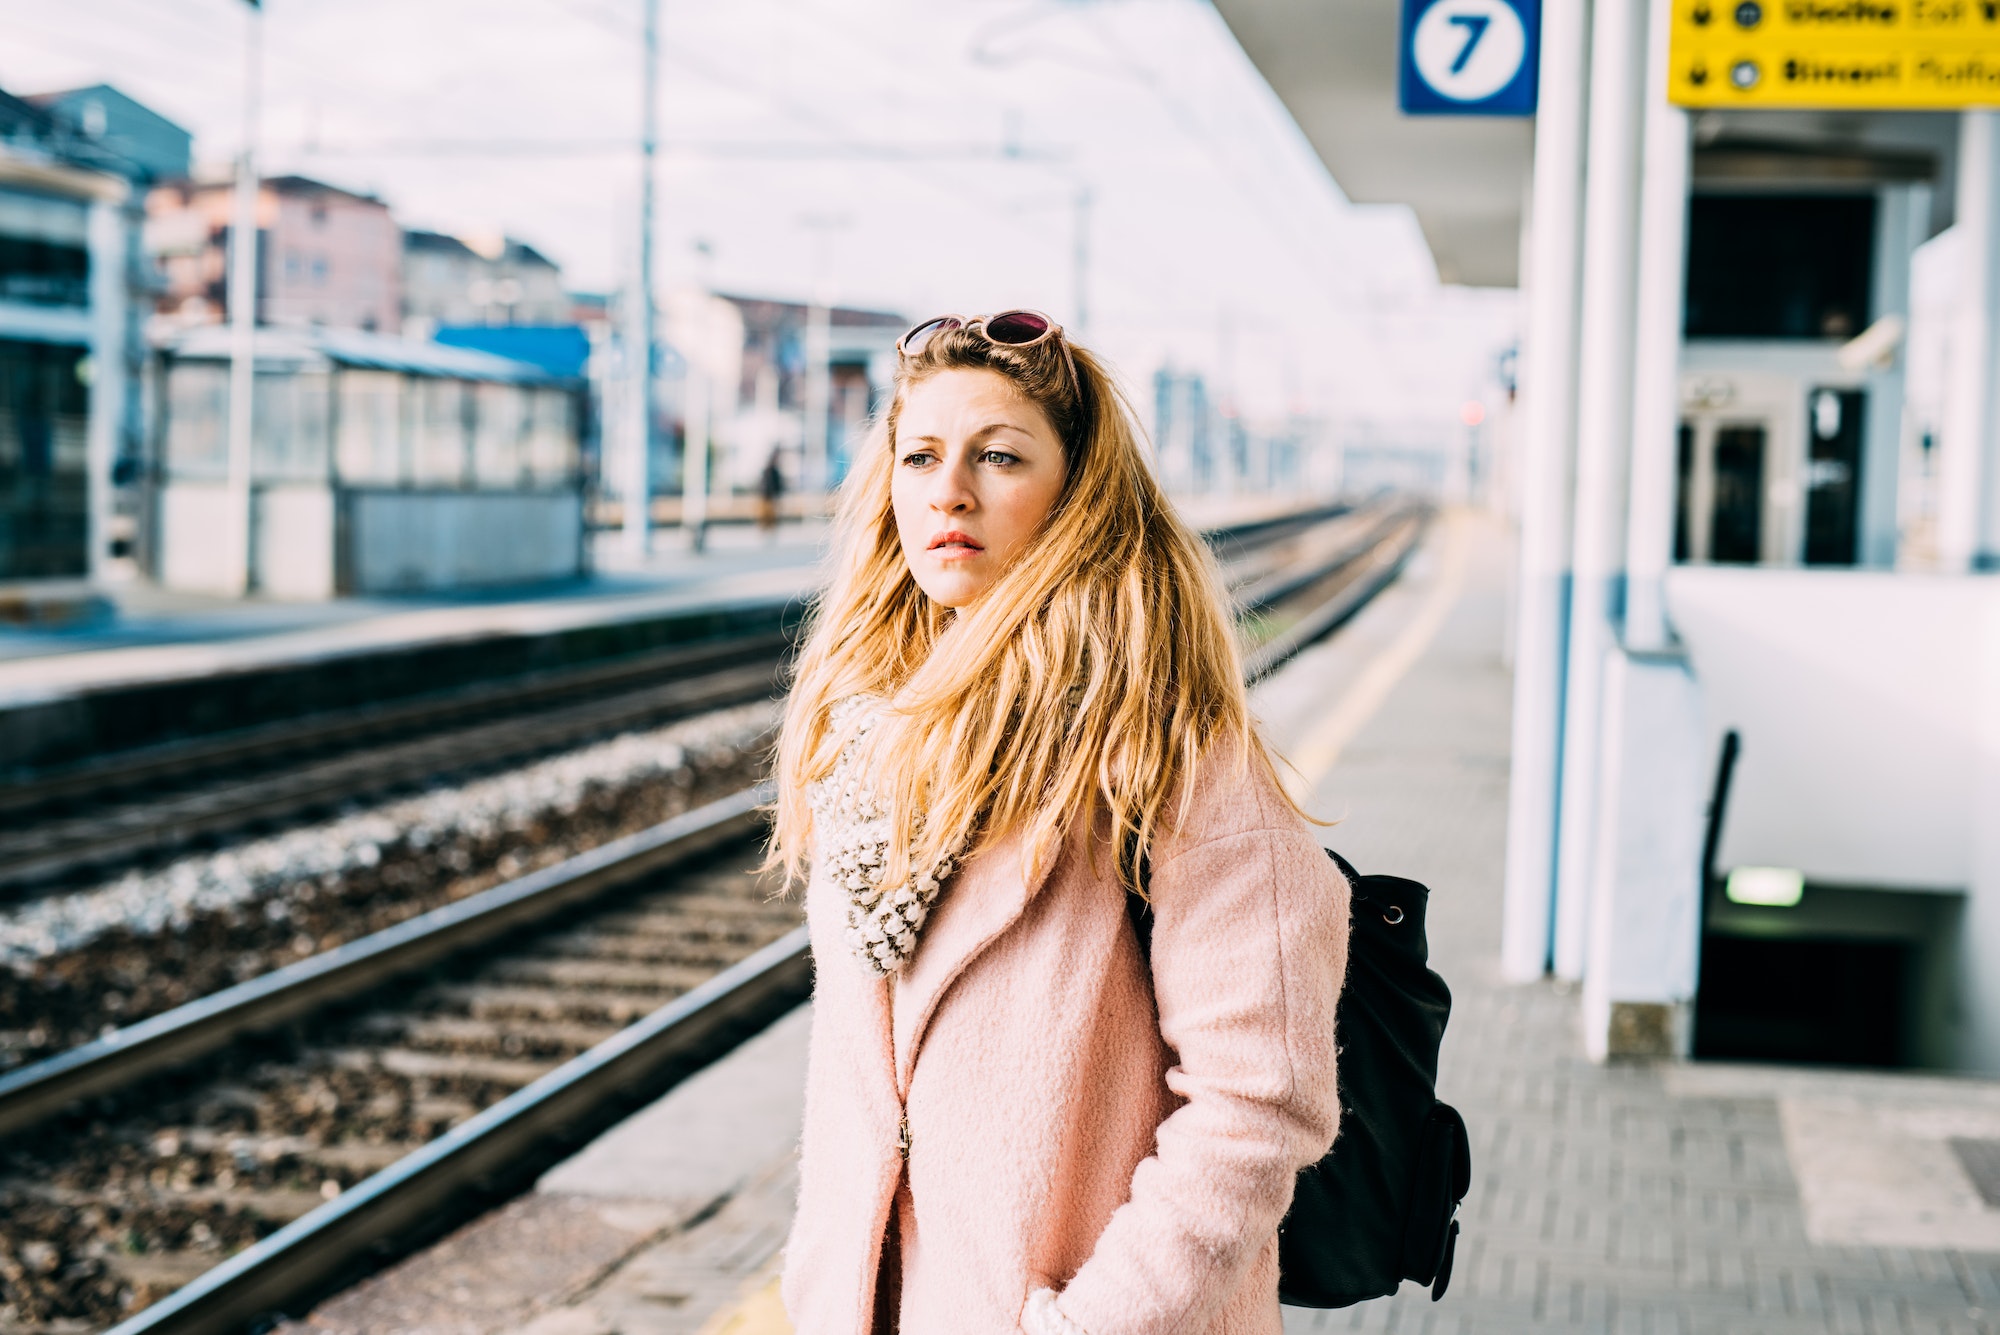 Young woman at the train station waiting for train